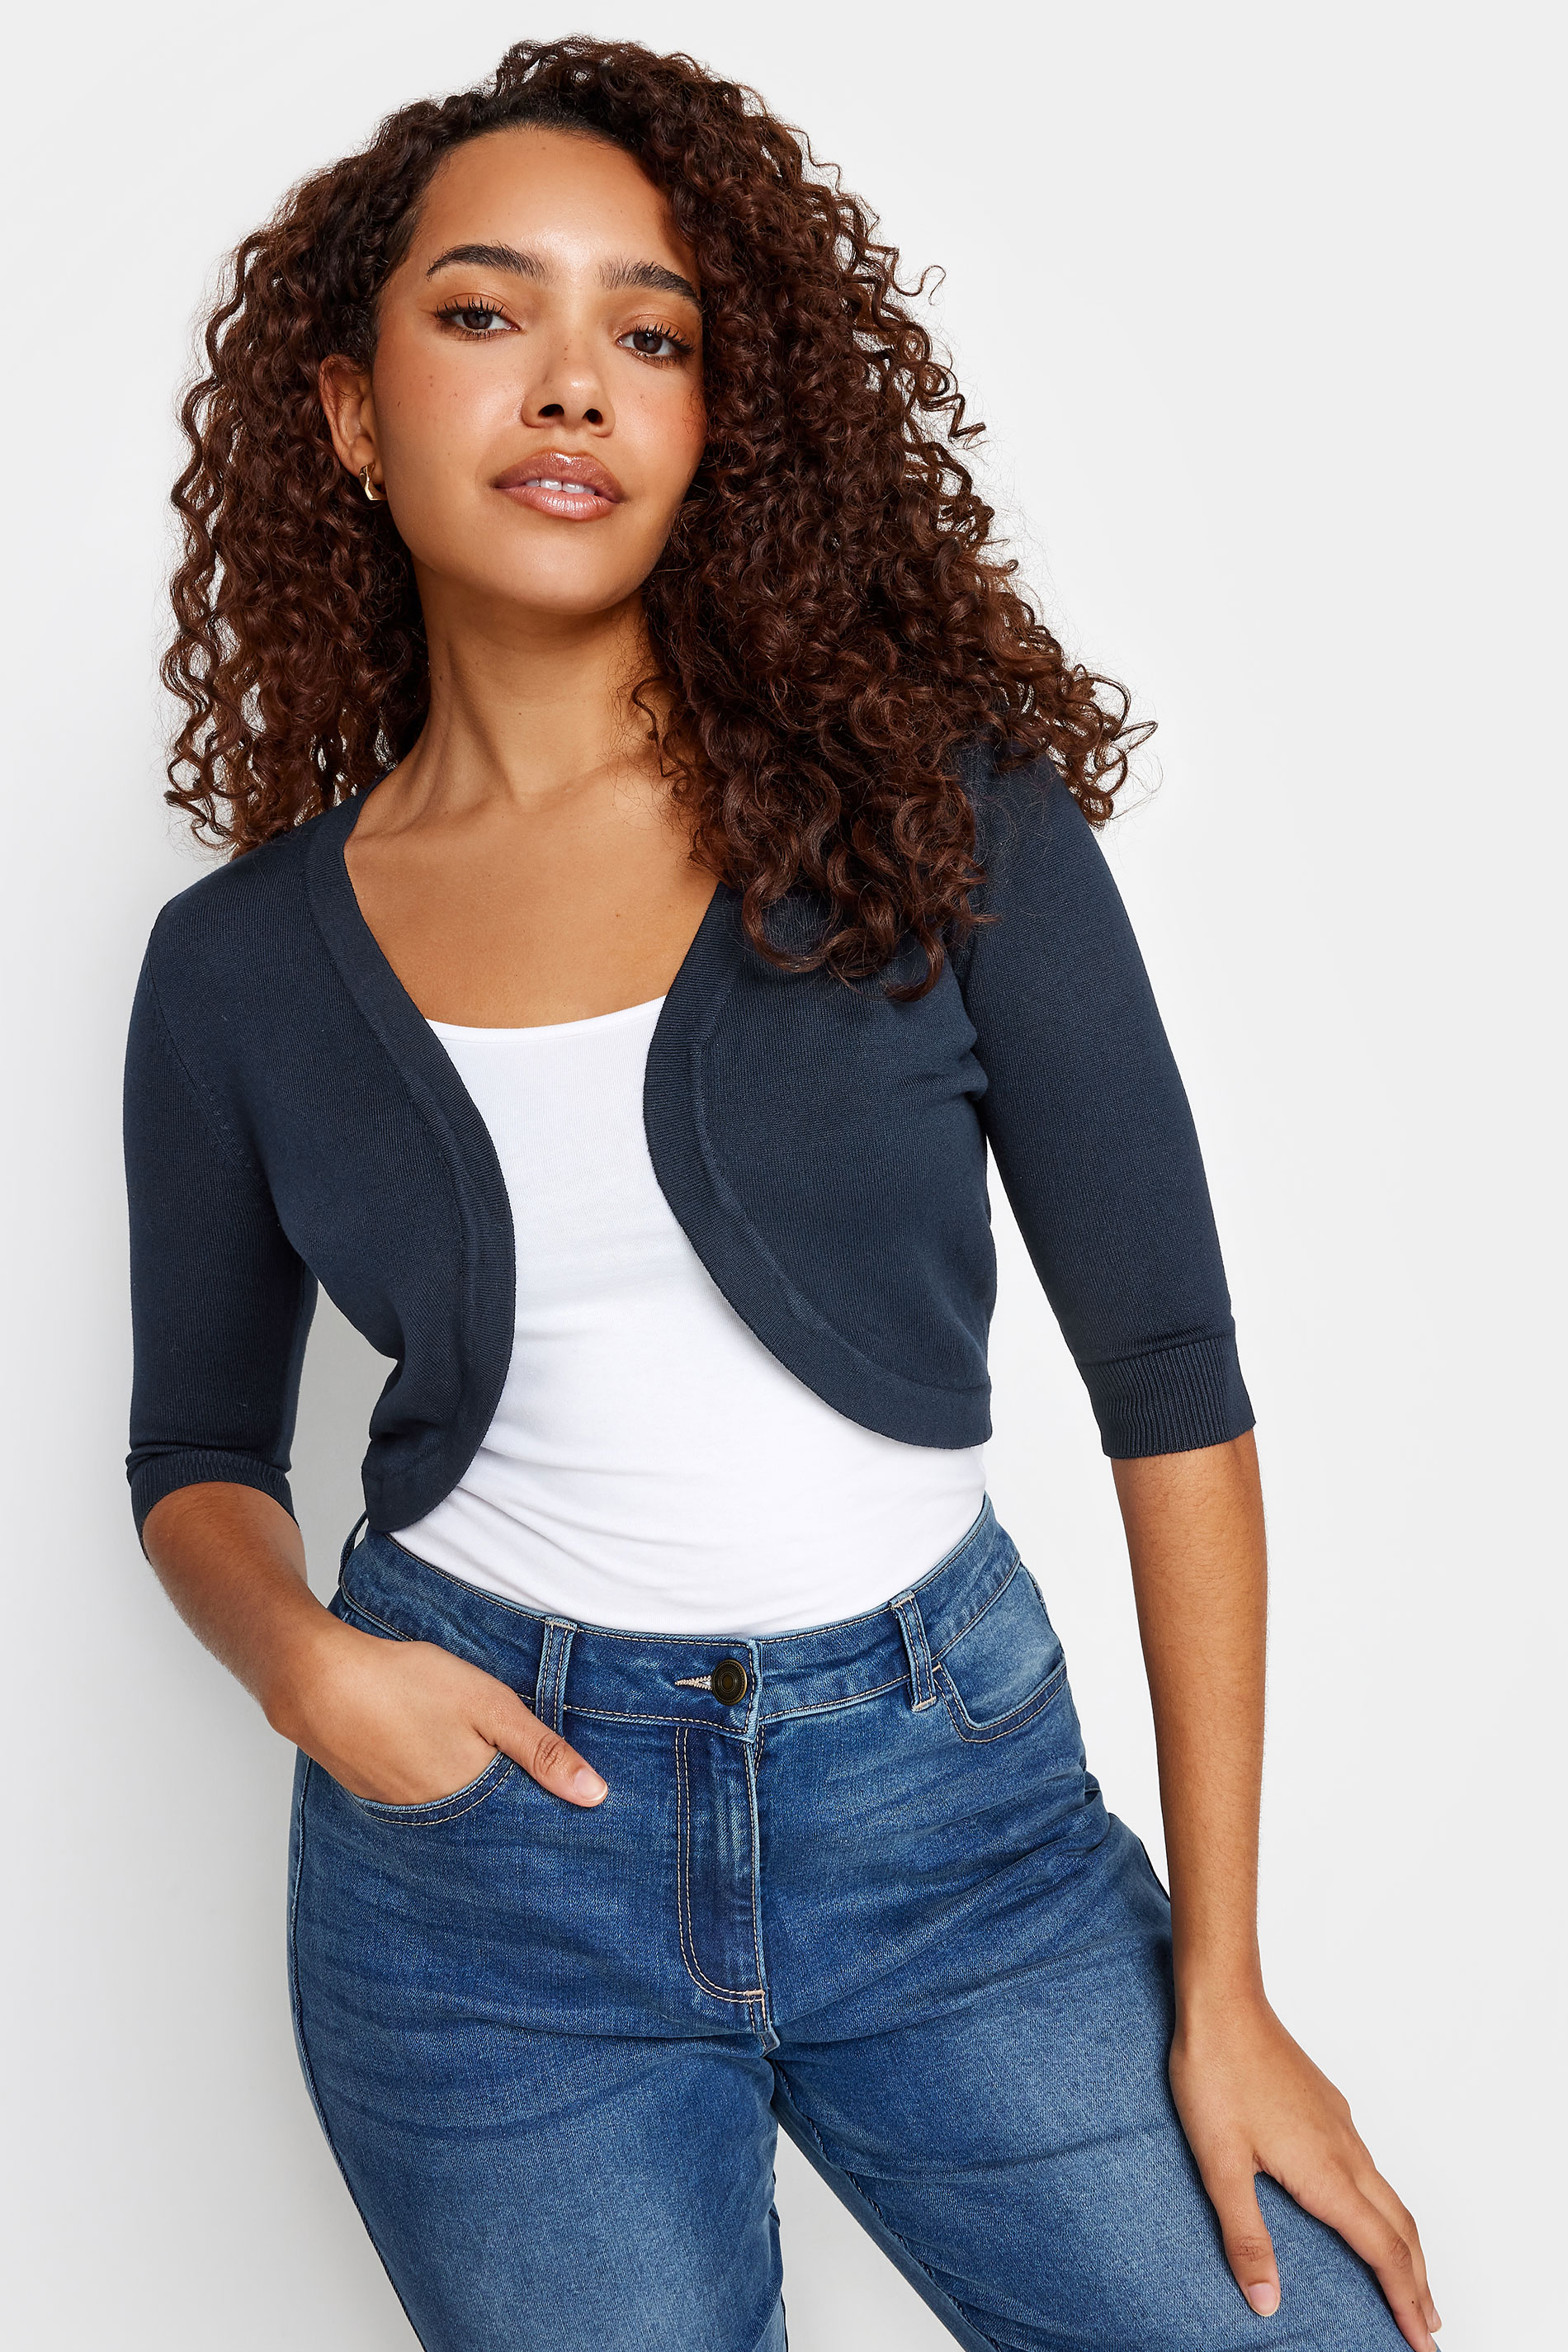 M&Co Navy Blue Cropped Cardigan | M&Co 1